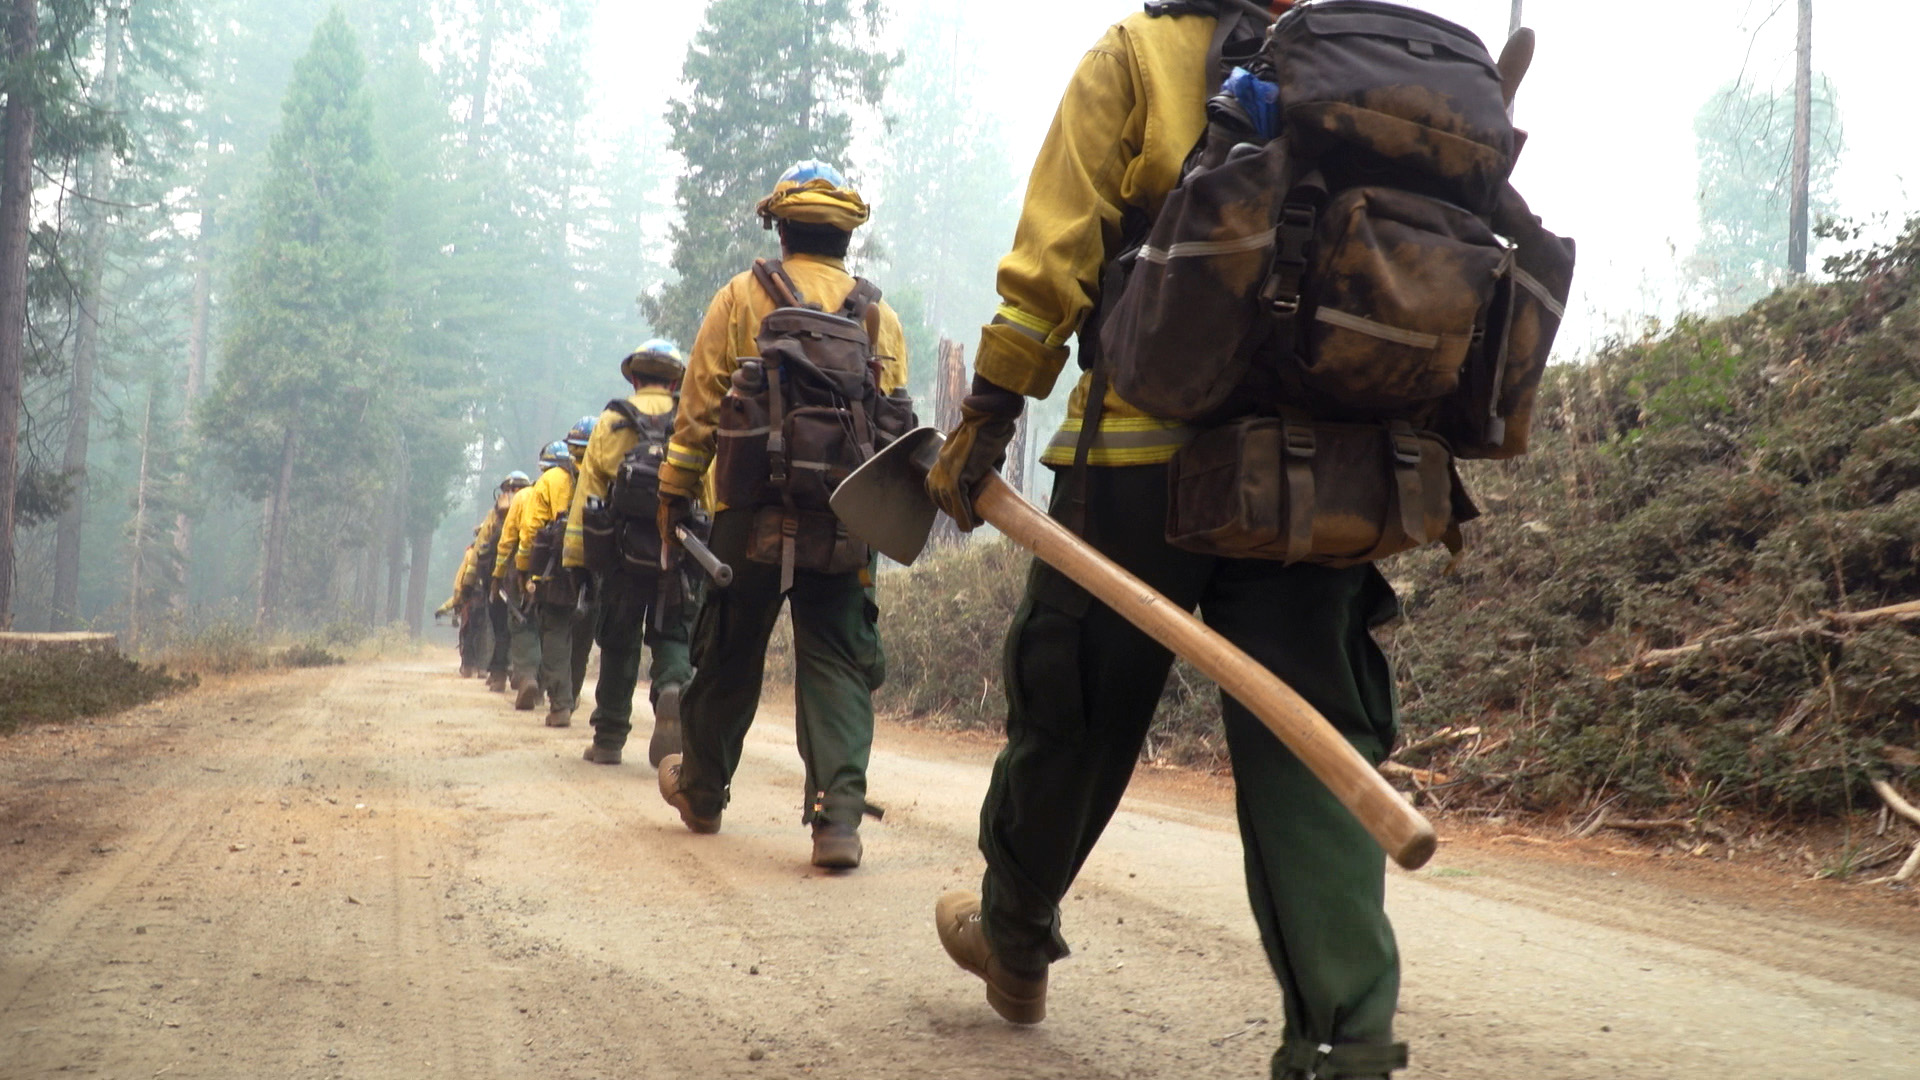 corpsmembers walking holding hand tools and wearing backpacks, walking on dirt road heading toward tall trees and smoke